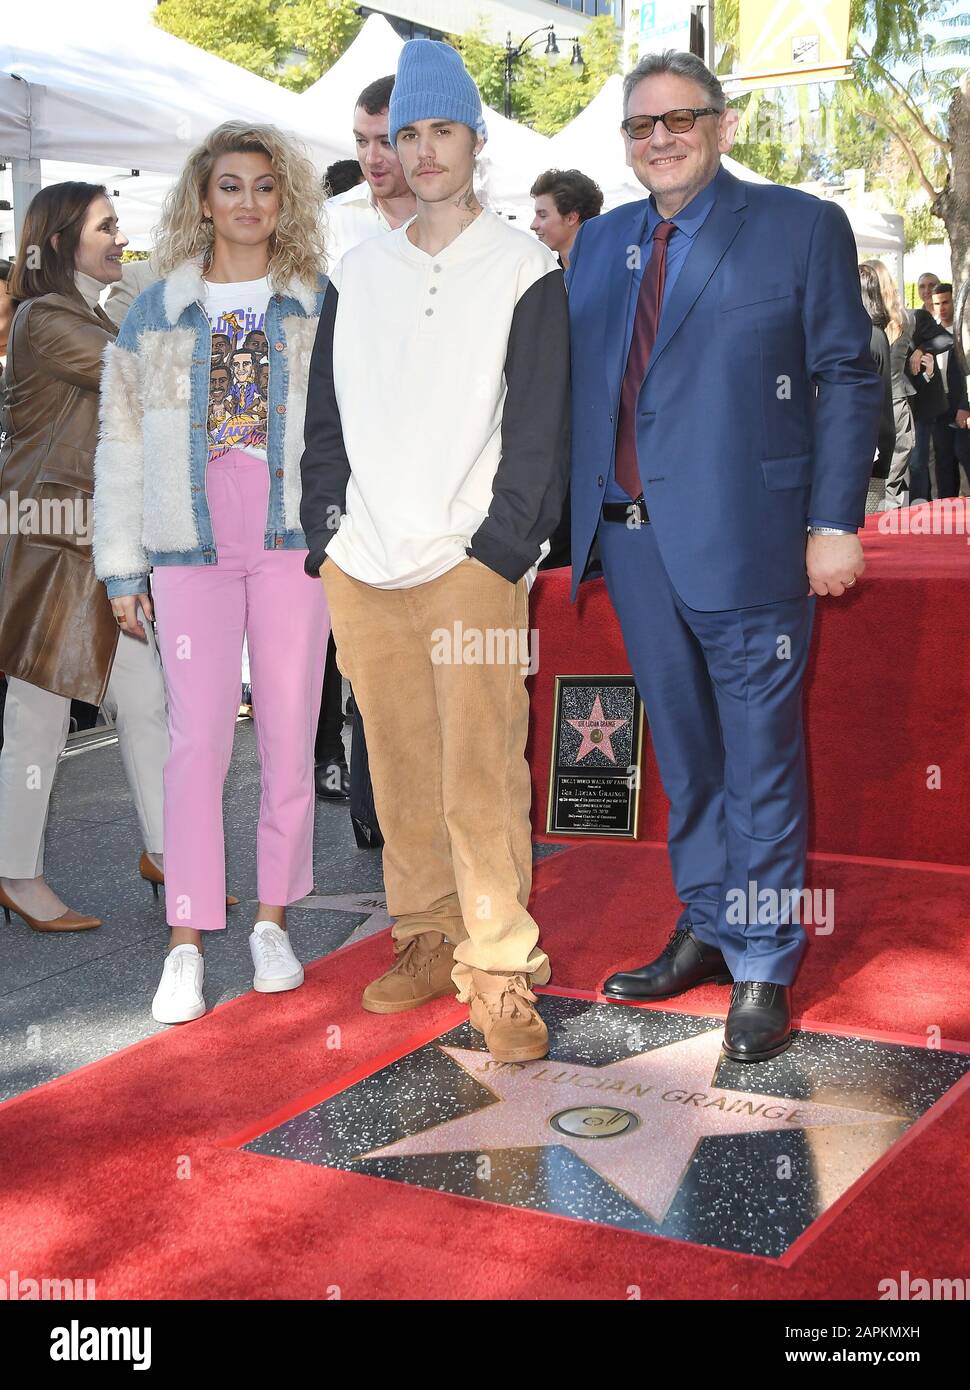 Los Angeles, USA. 23rd Jan, 2020. (L-R) Tori Kelly, Justin Bieber and Sir  Lucian Grainge at the Sir Lucian Grainge Star On The Hollywood Walk Of Fame  Ceremony held in front of